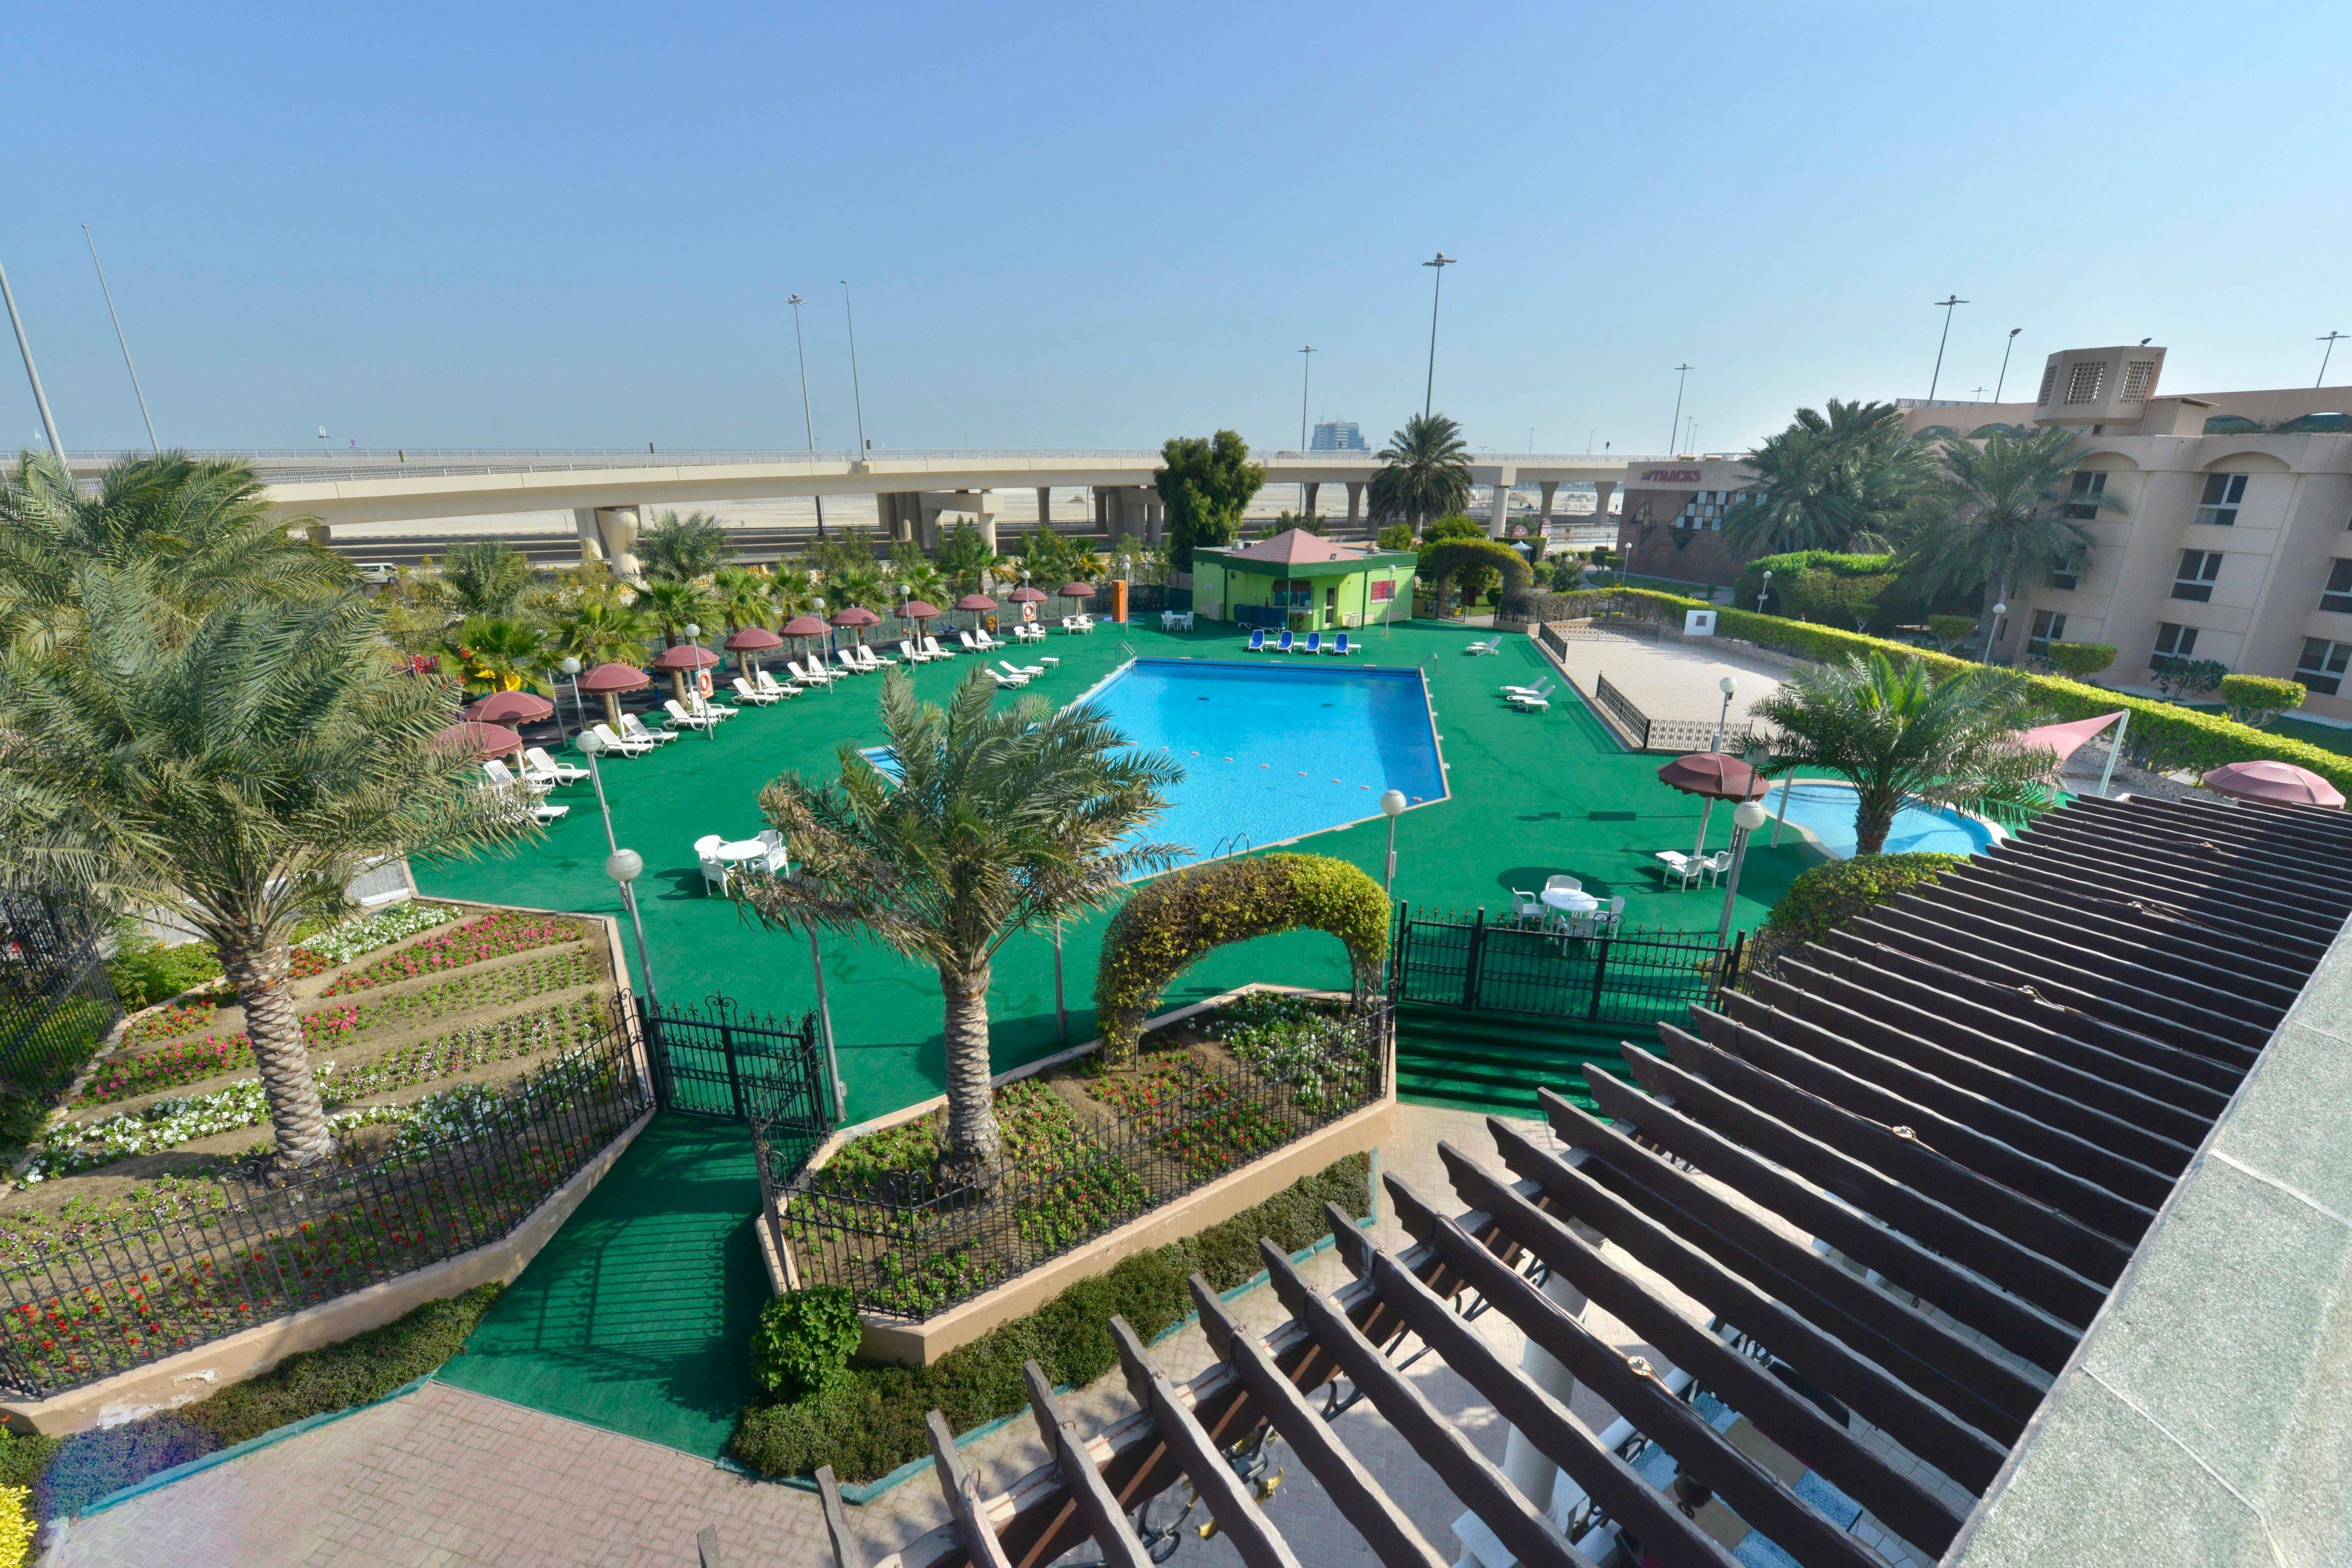 Top 5 Rated Luxury Family Friendly Hotels in Manama